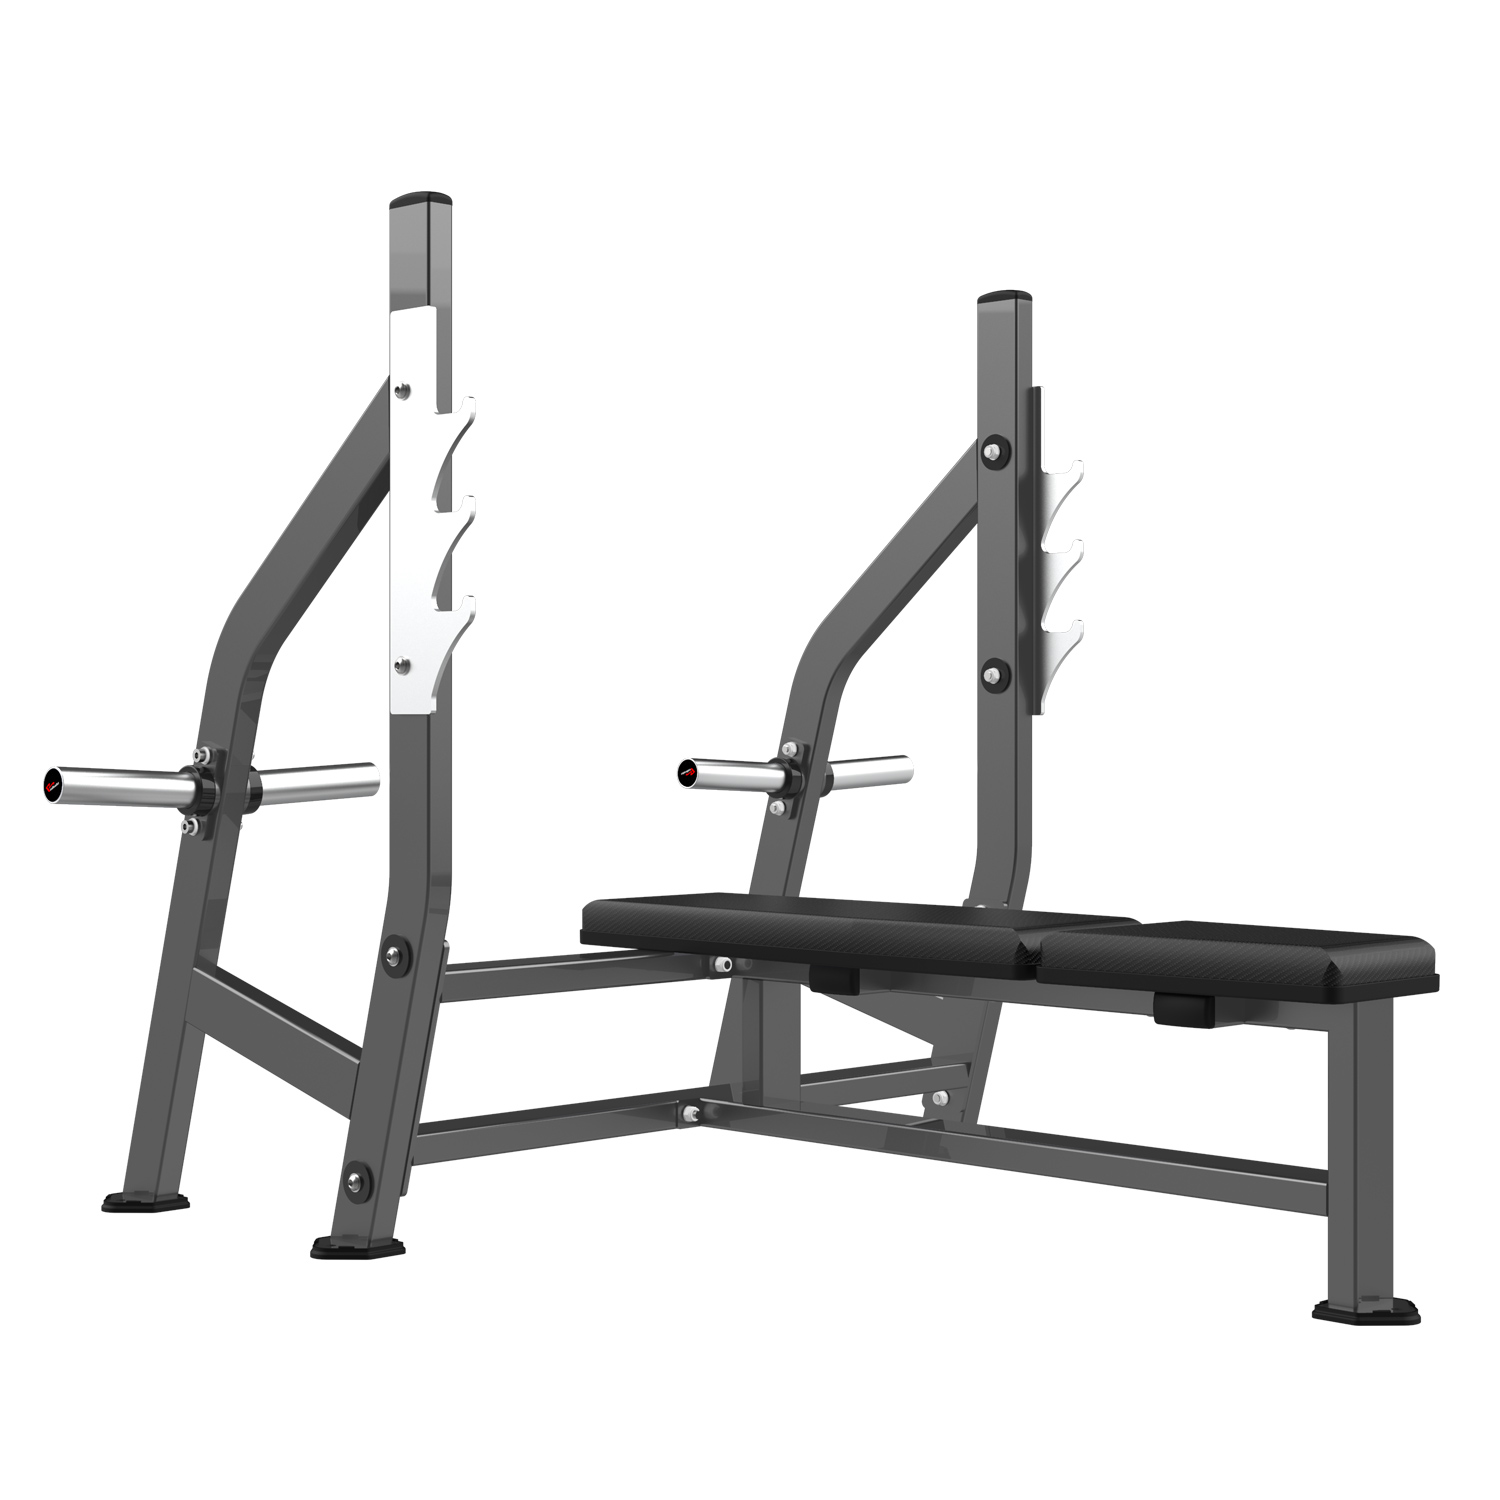 Realleader Home Gym Equipment of 90-Degree Bench (FW-2020) - China